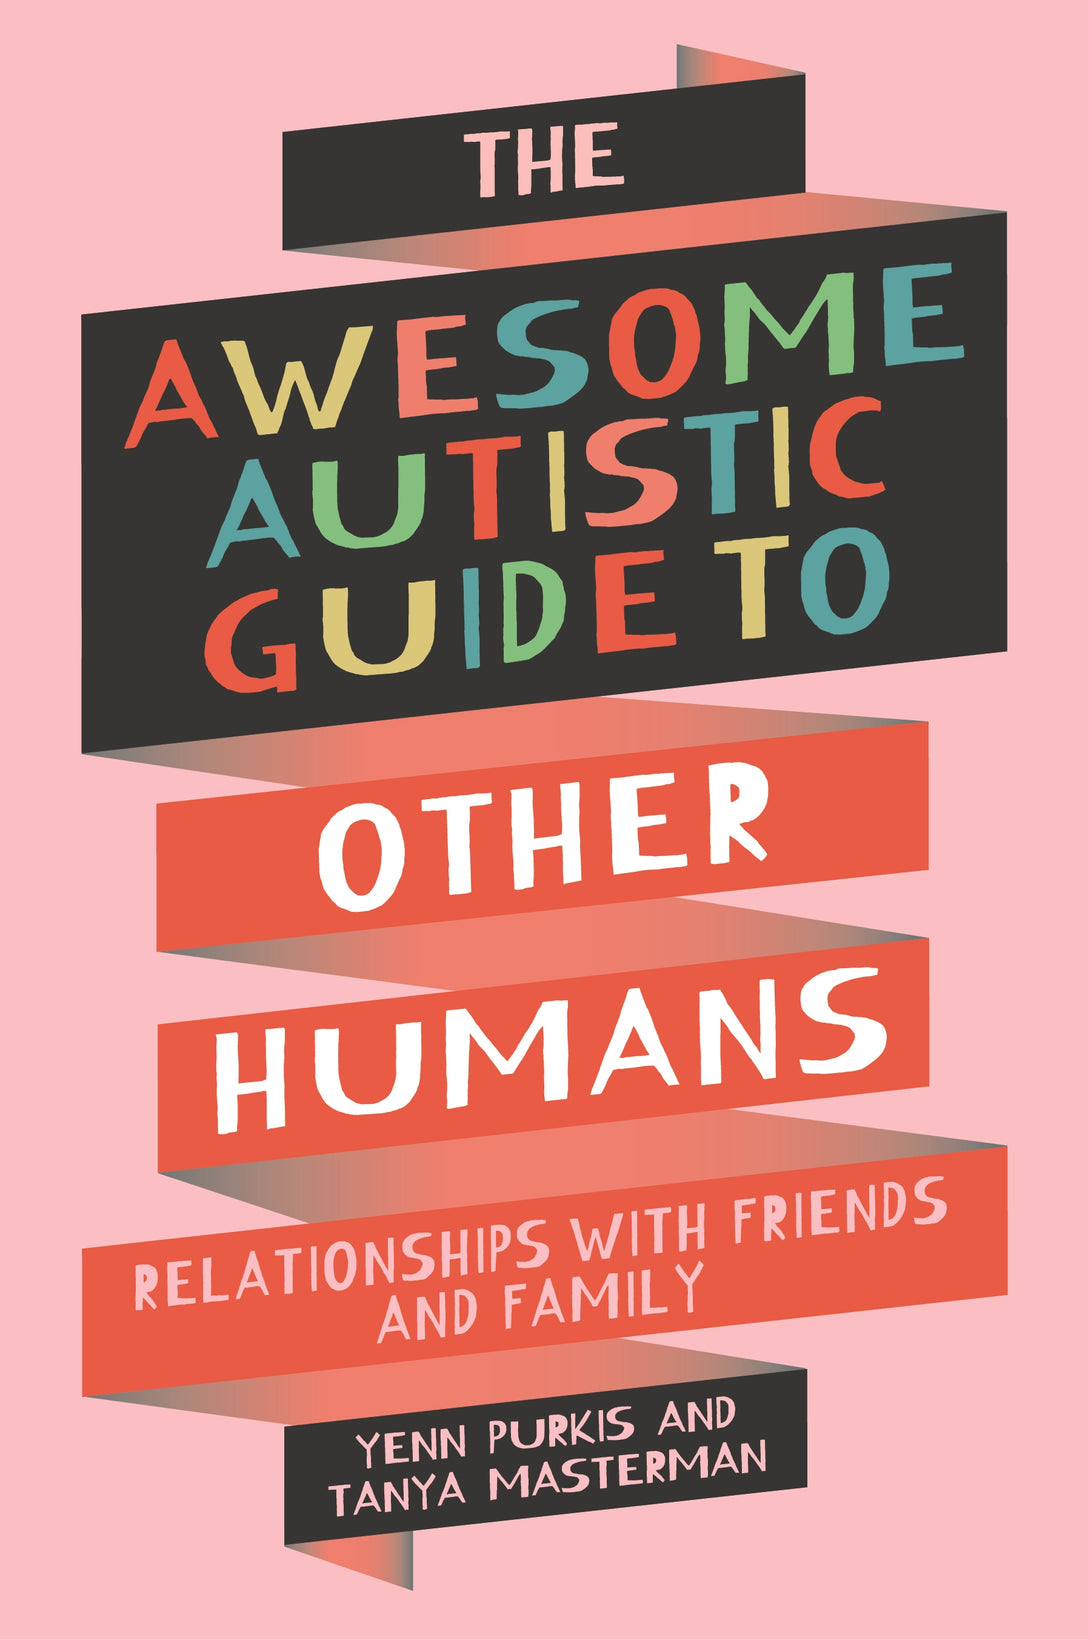 The Awesome Autistic Guide to Other Humans by Yenn Purkis, Tanya Masterman